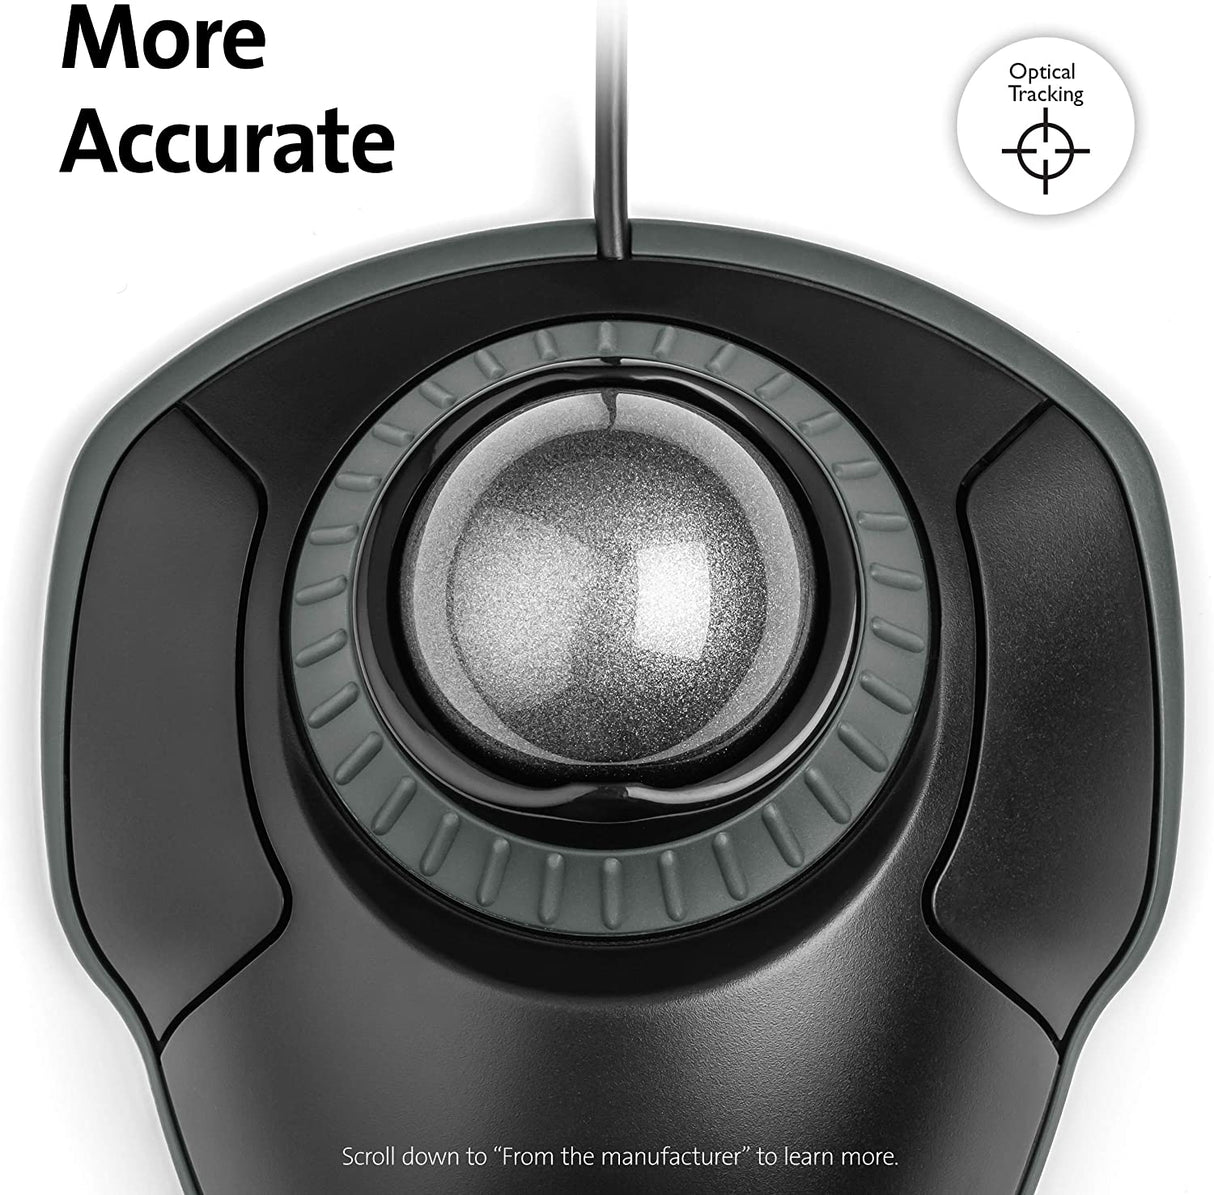 Kensington Orbit Trackball Mouse with Scroll Ring - Finger Control Ergonomic Mouse with Programmable Buttons, Precise Optical Control for Windows and MacOS - Space Gray (K75327WW) Black-Gray Wired